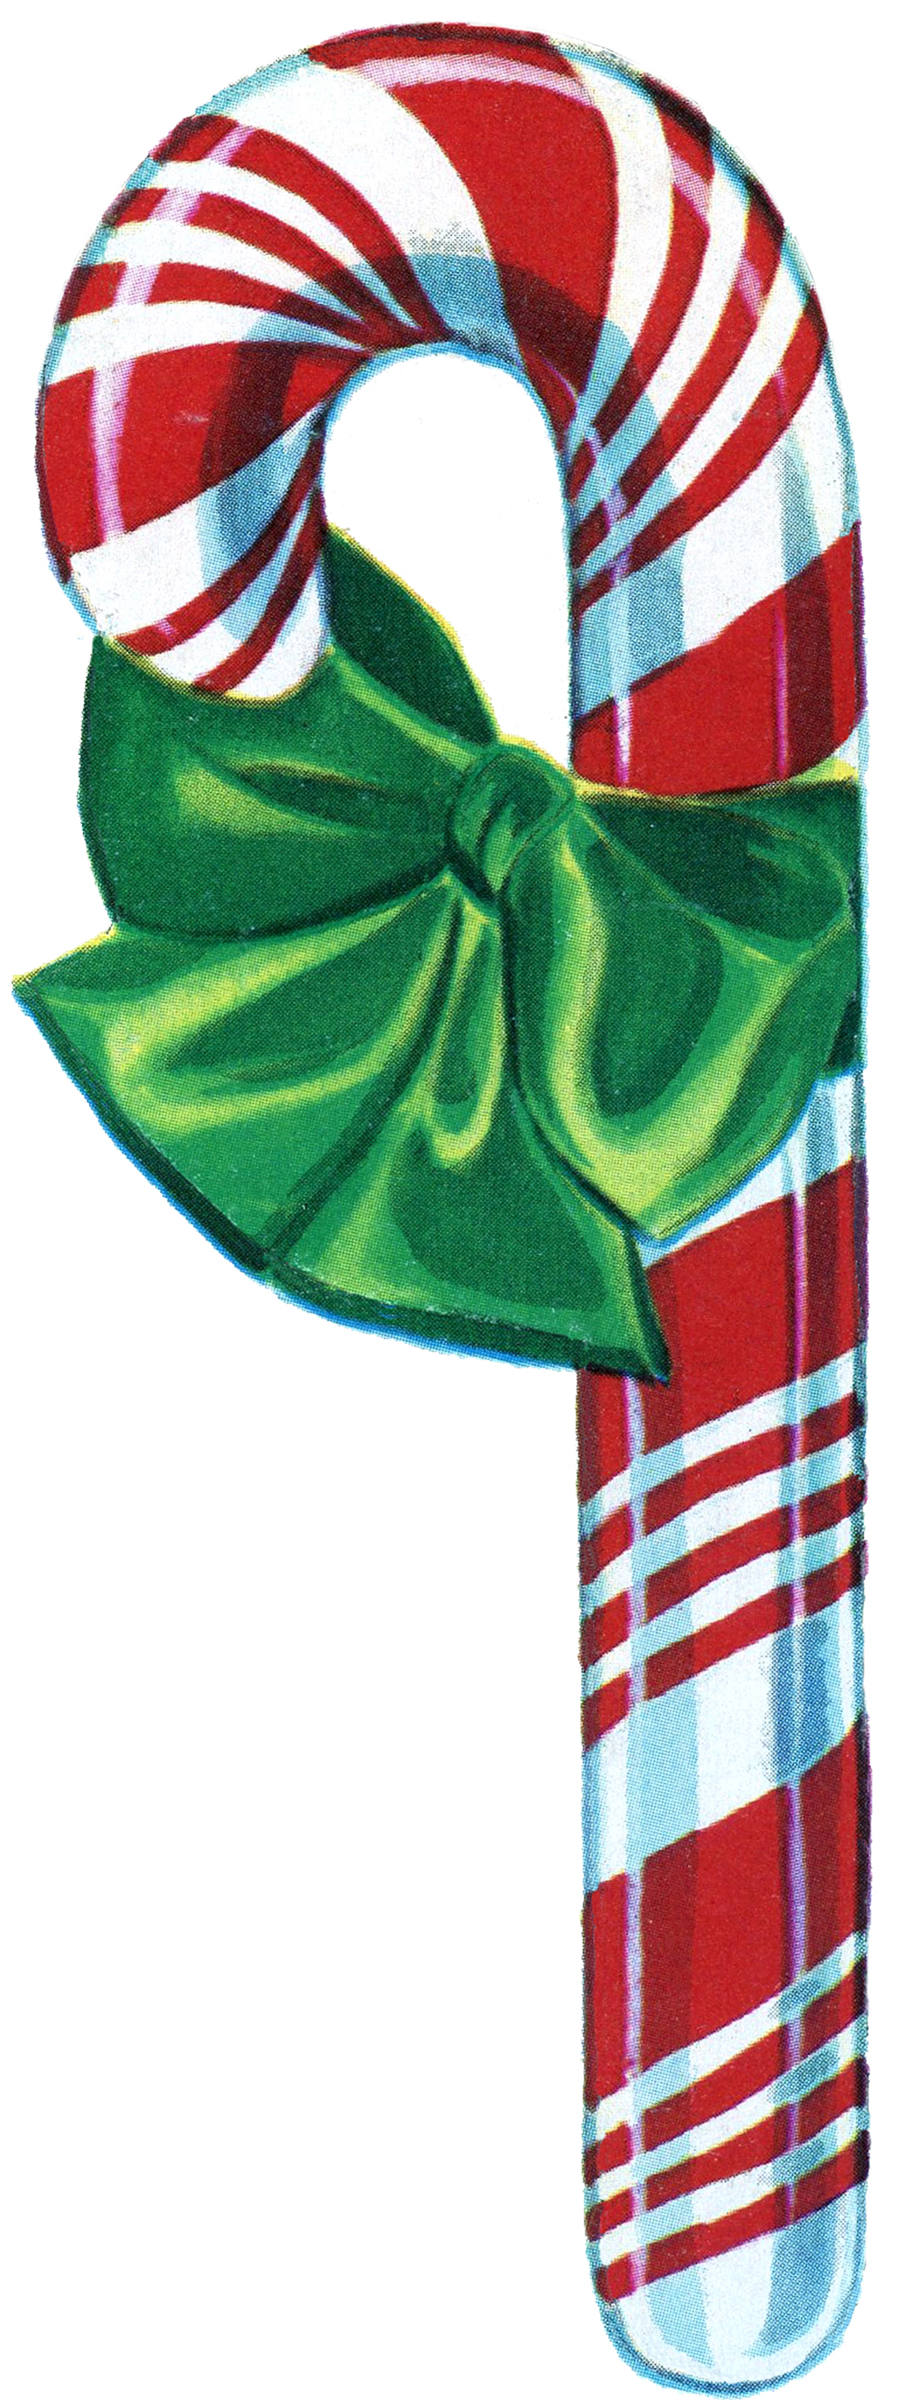 Free Vintage Christmas Clip Art - Candy Cane - The ...